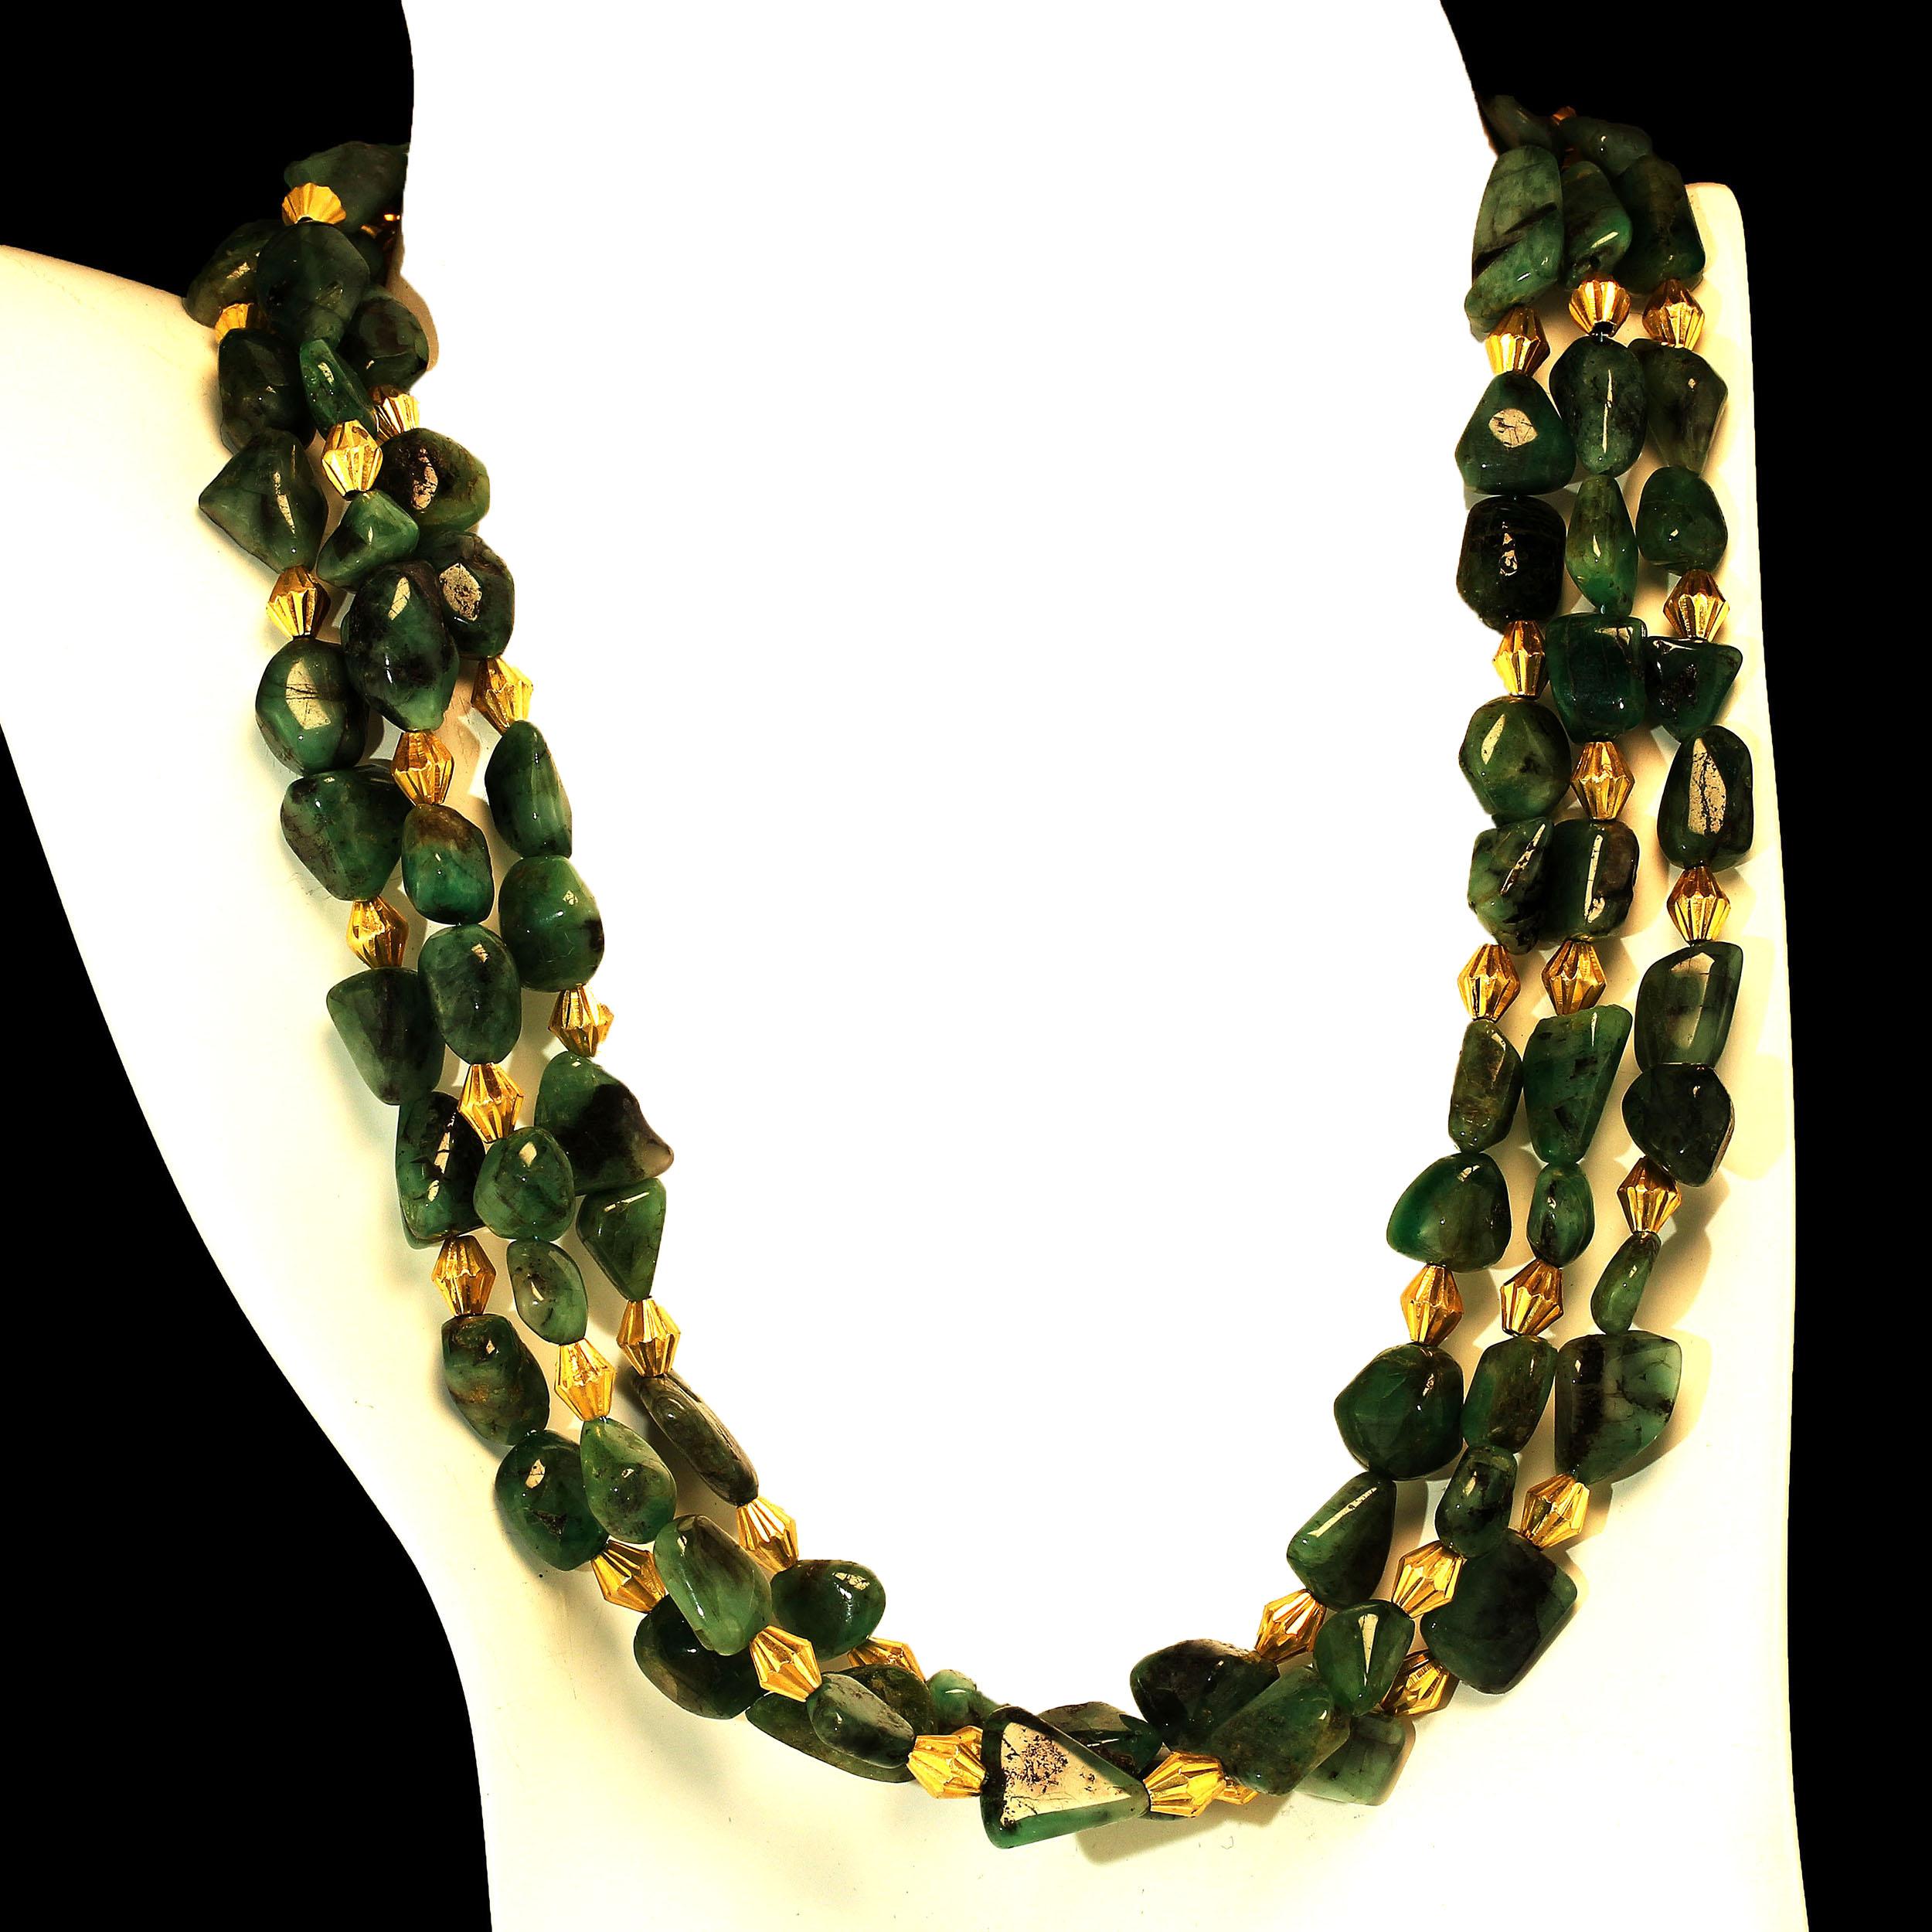 Artisan AJD 14 Inch Three-Strand Emerald Nugget Necklace with Goldy Accents  